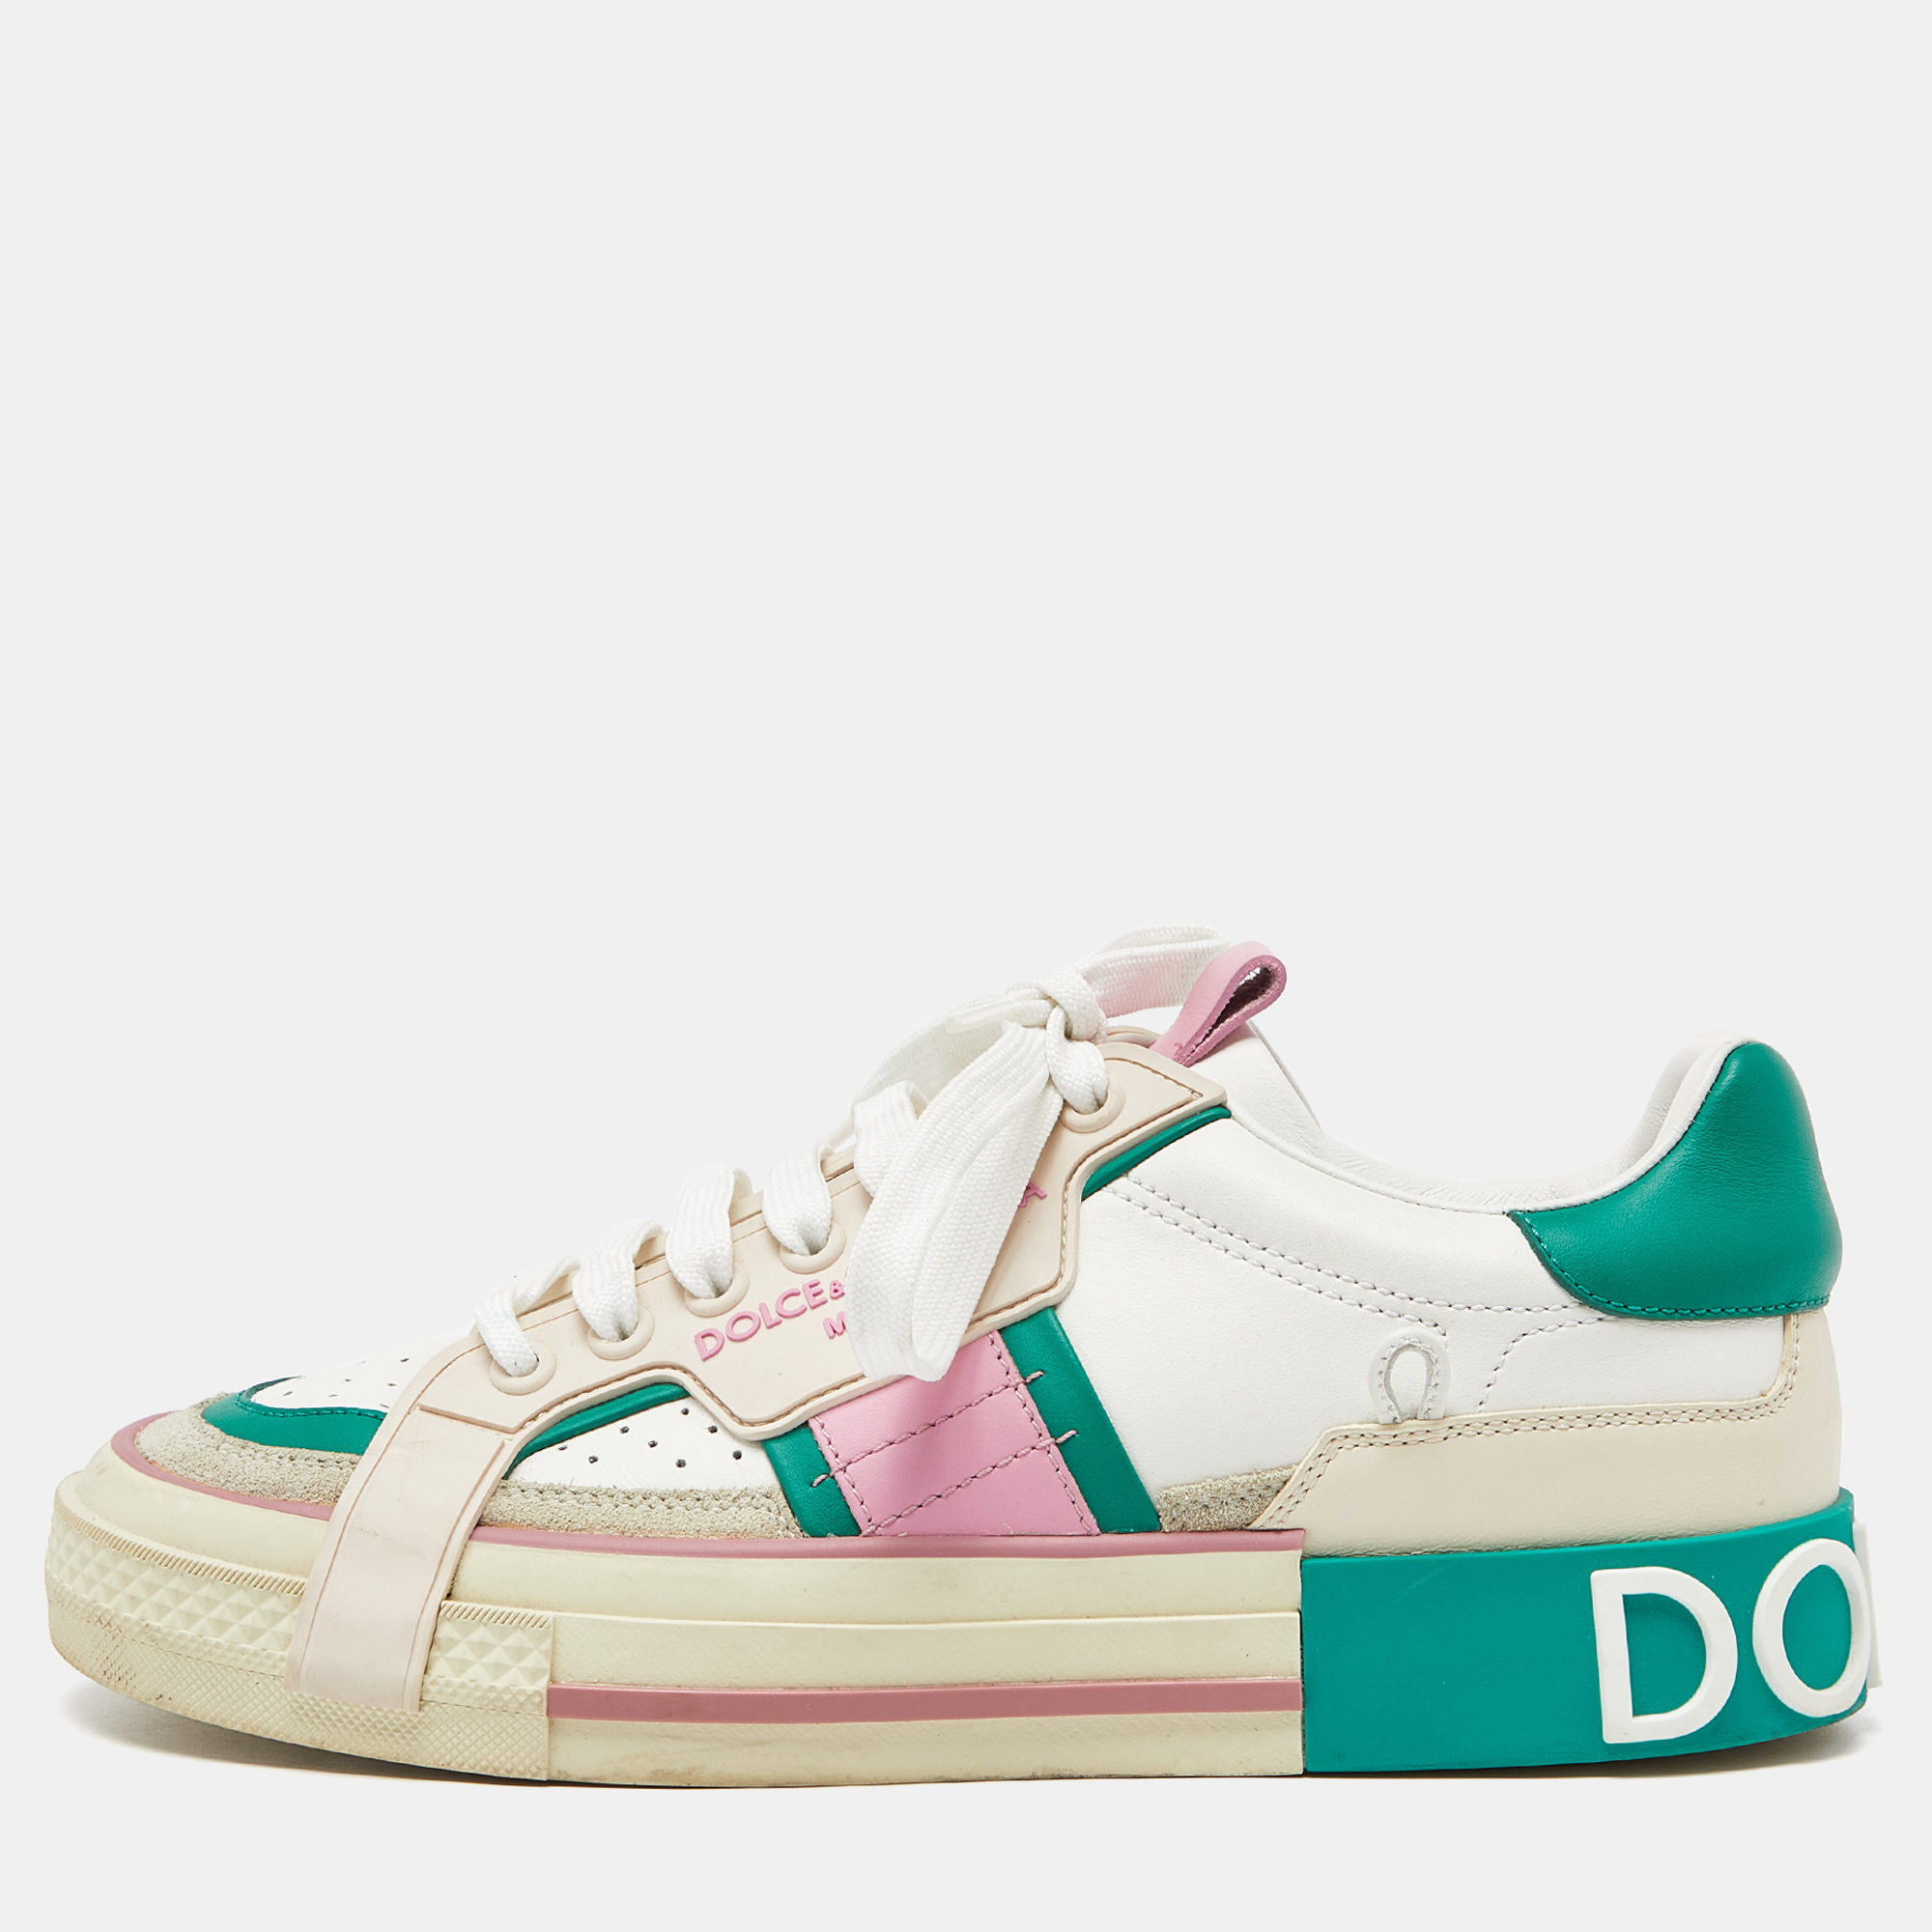 Dolce & Gabbana Multicolor Leather And Suede Custom 2.Zero Sneakers Size 38